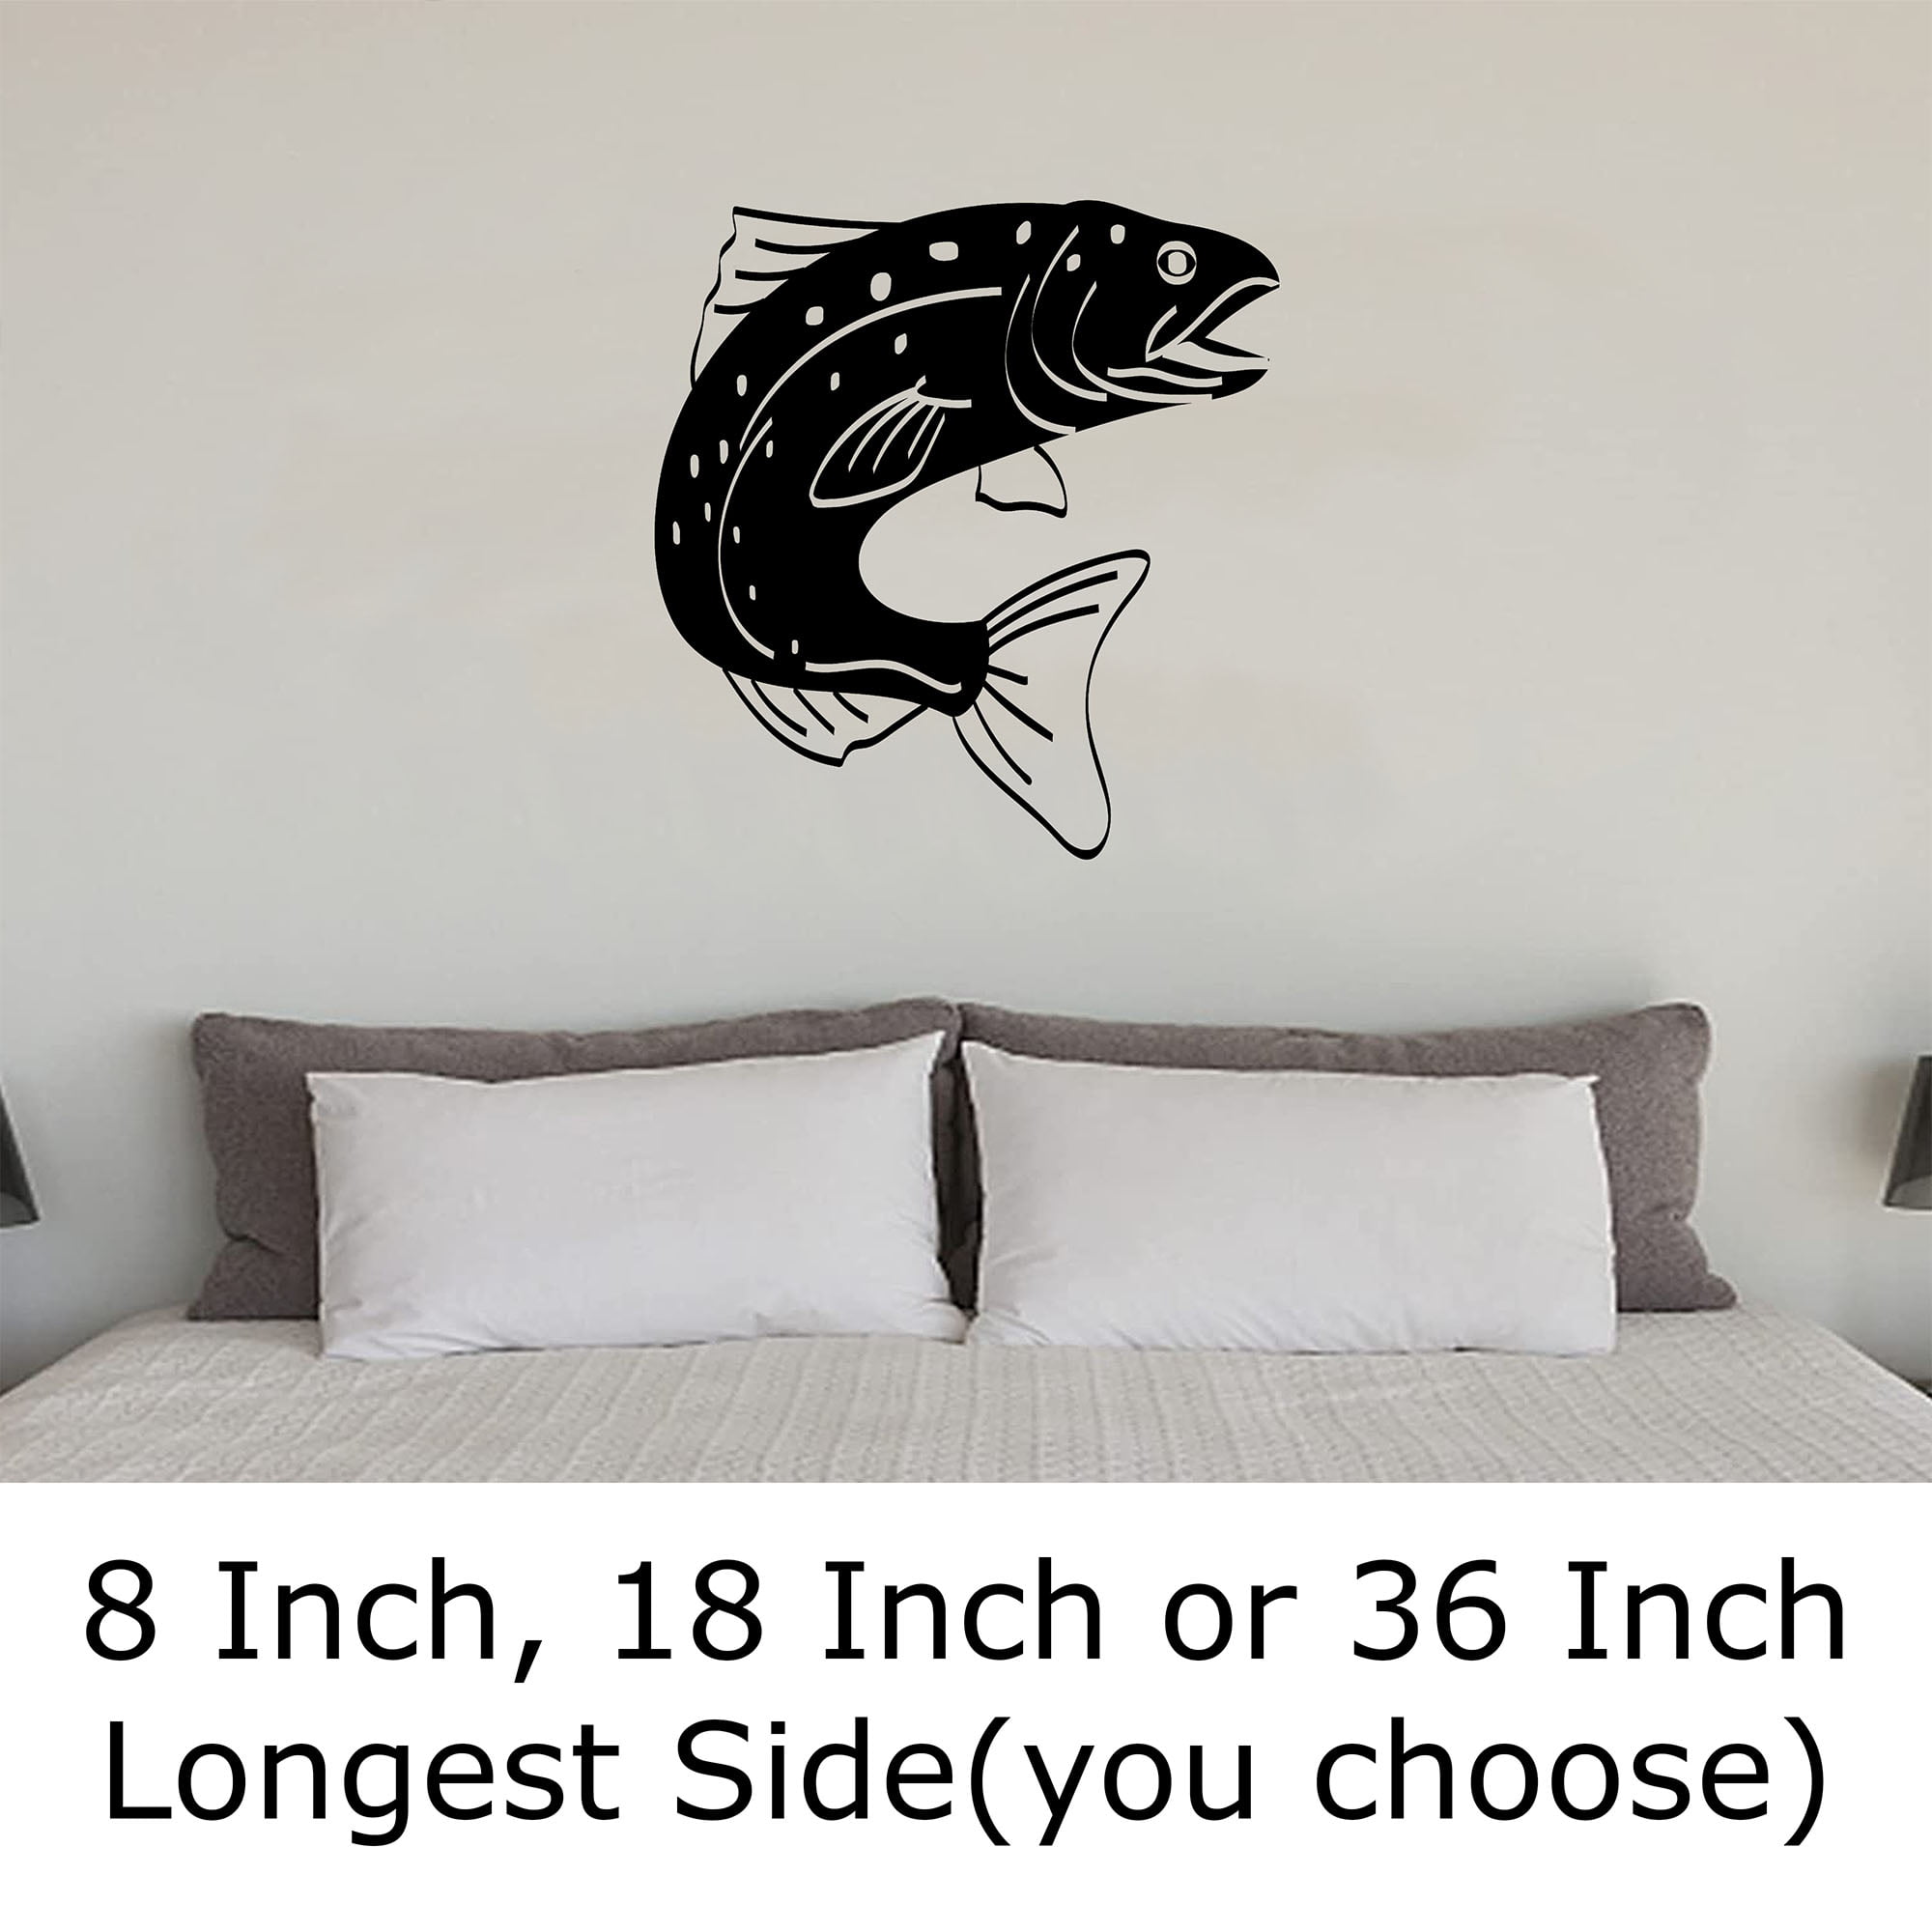 Bass Fish Outline Fishing Outdoors Activates Hobbies Wall Decals